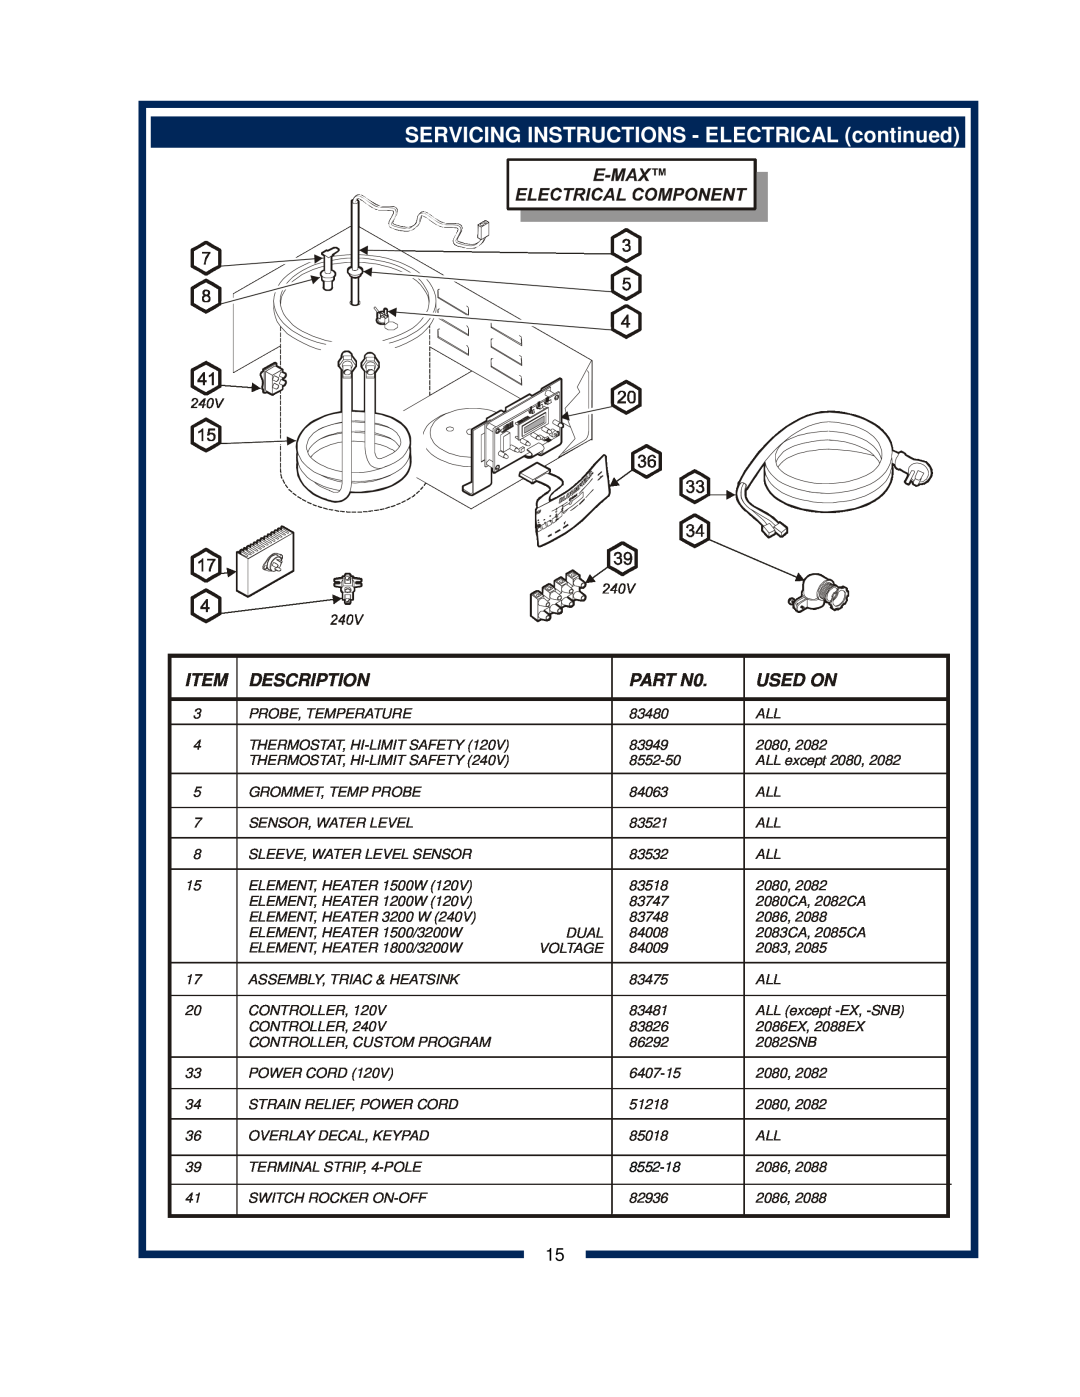 Bloomfield 2082, 2088EX, 2086EX SERVICING INSTRUCTIONS - ELECTRICAL continued, Description, PART N0, Used On, 8552-18 